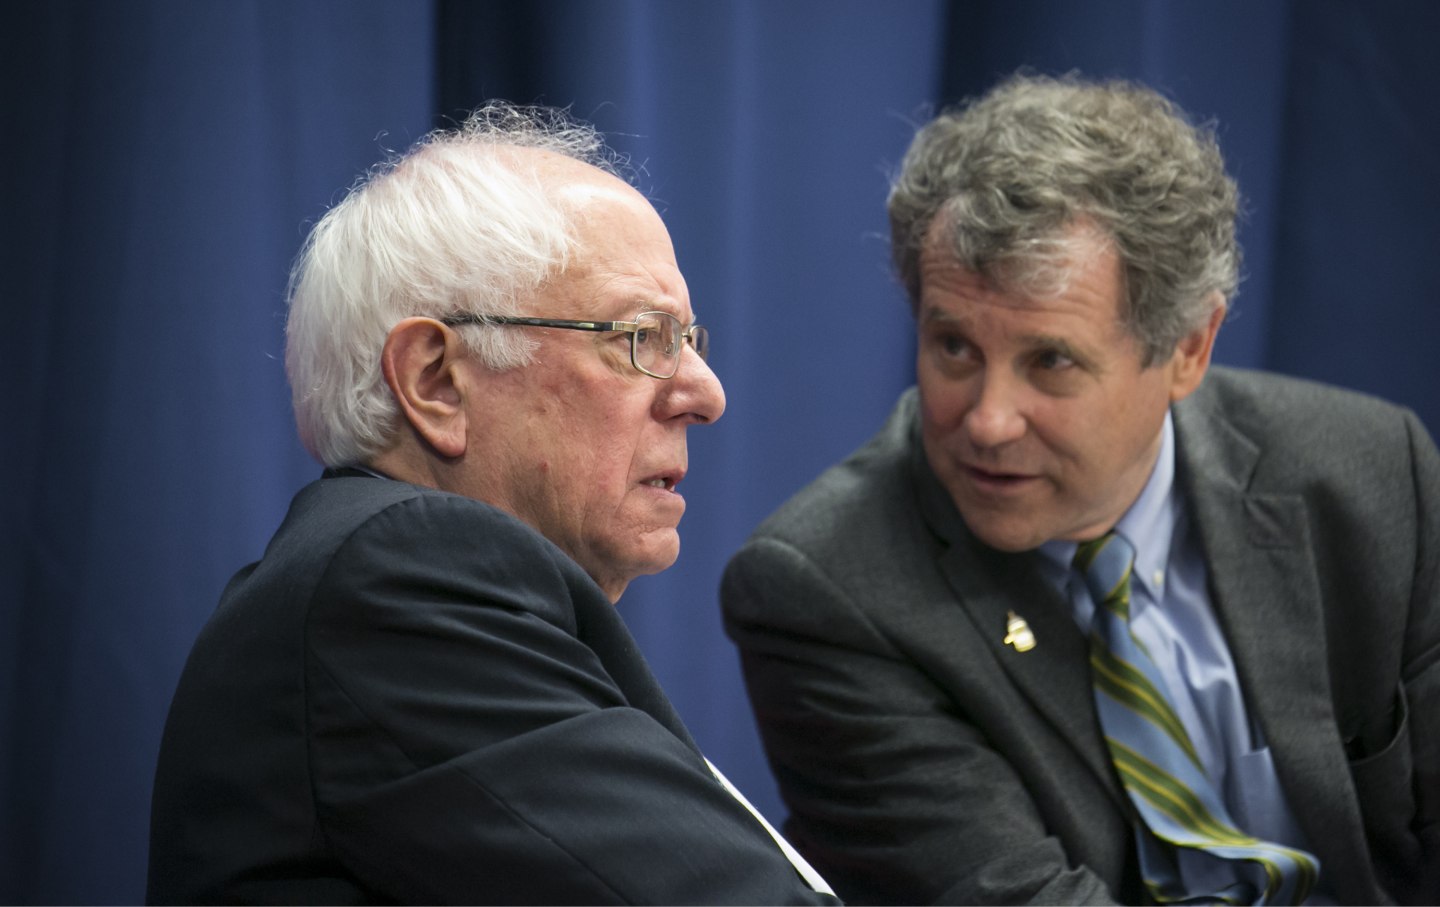 Senator Bernie Sanders, an Independent from Vermont and 2020 presidential candidate, left, listens as Senator Sherrod Brown, a Democrat from Ohio, speaks during the Martin and Coretta King Unity Breakfast in Selma, Ala., on Sunday, March 3, 2019.